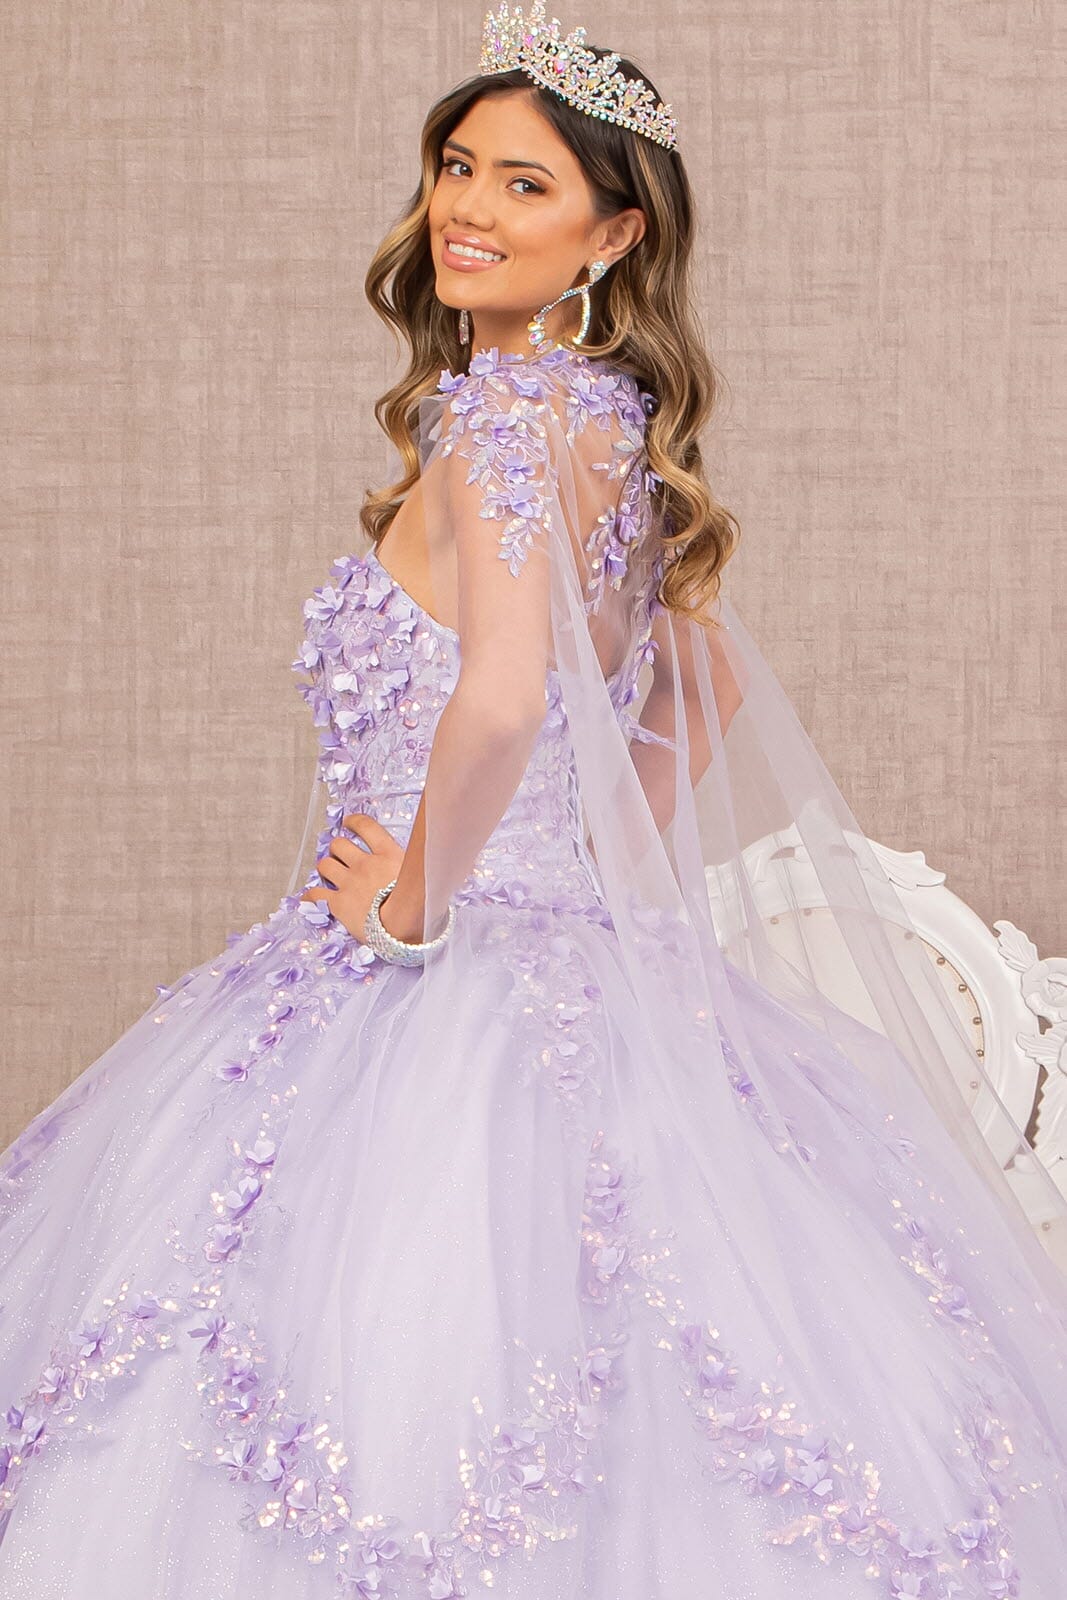 3D Floral Strapless Cape Ball Gown by Elizabeth K GL3103